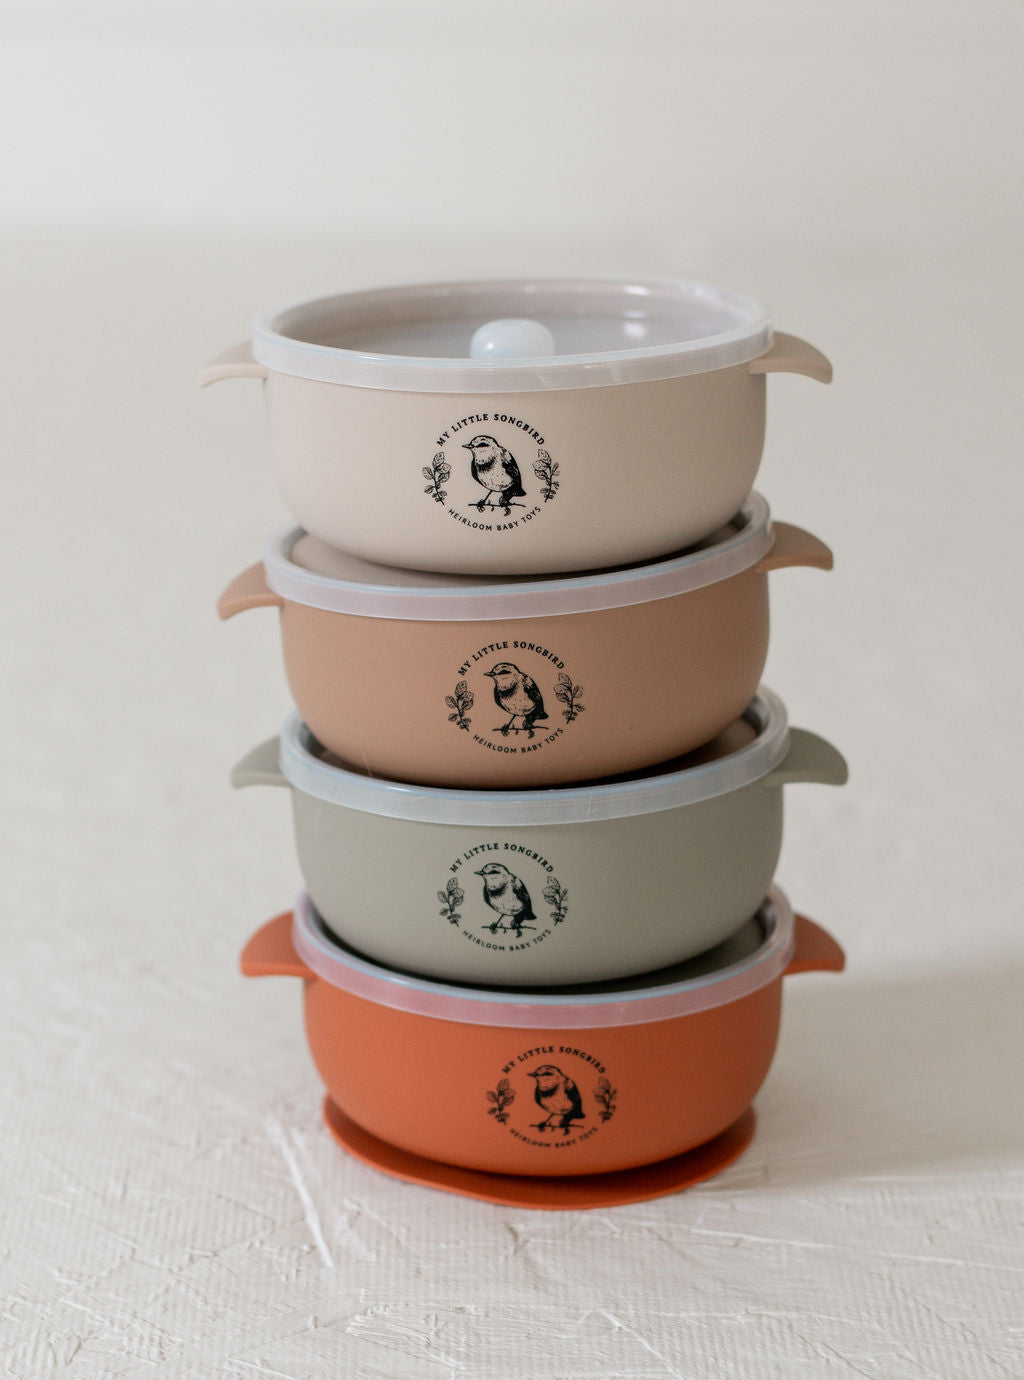 Neutral Tones Silicone Bowls from My Little Songbird - ShopMyLittleSongbird